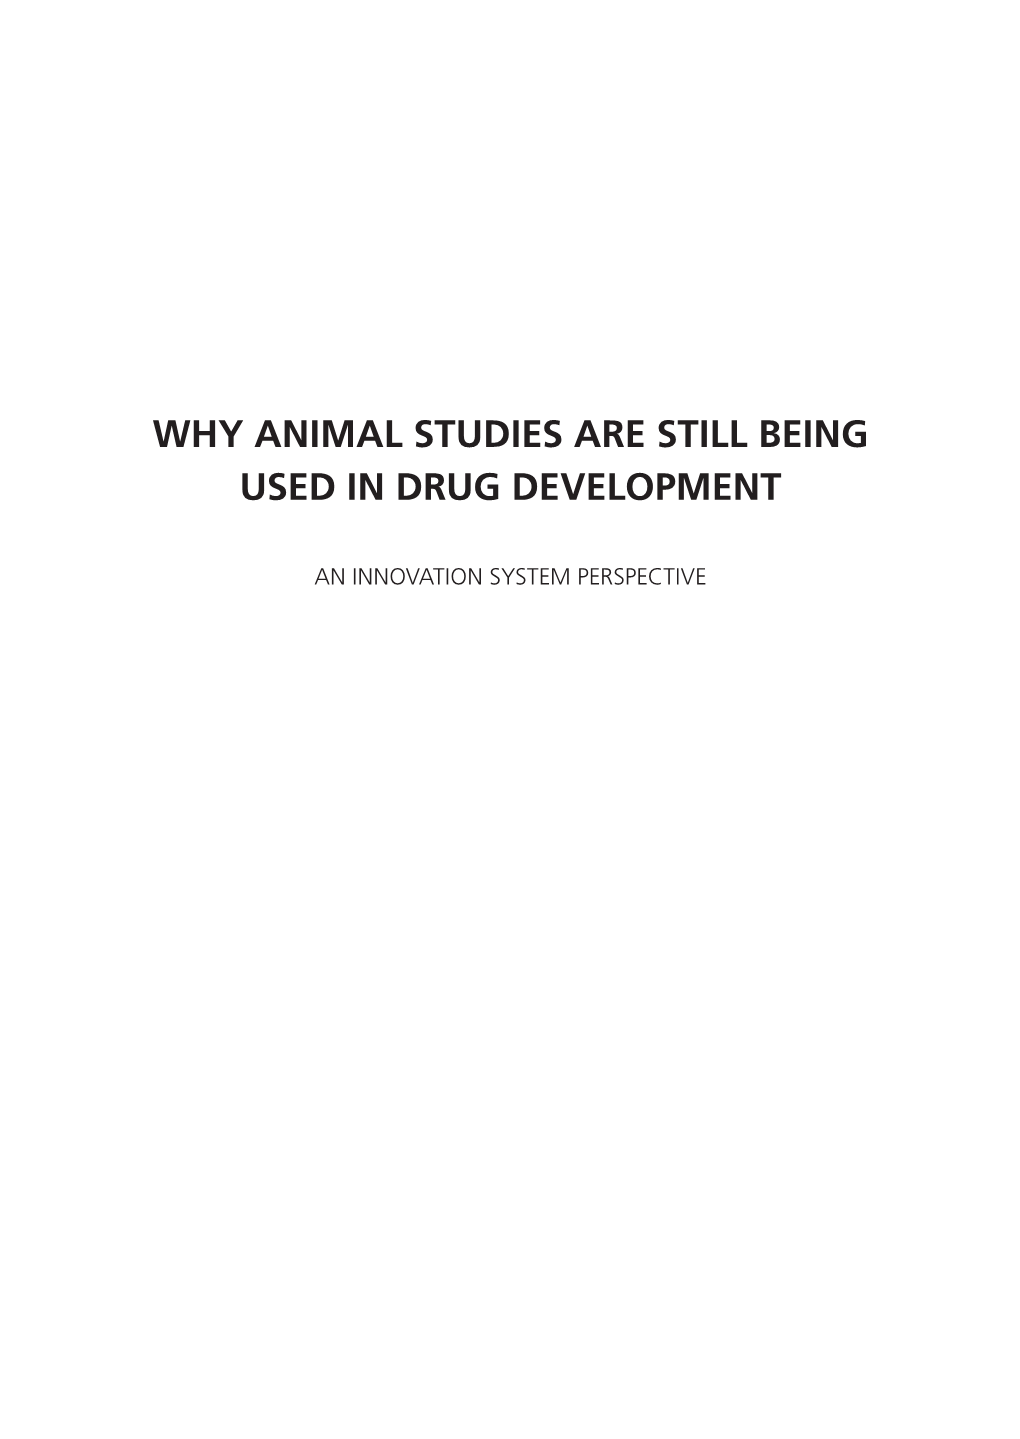 Why Animal Studies Are Still Being Used in Drug Development